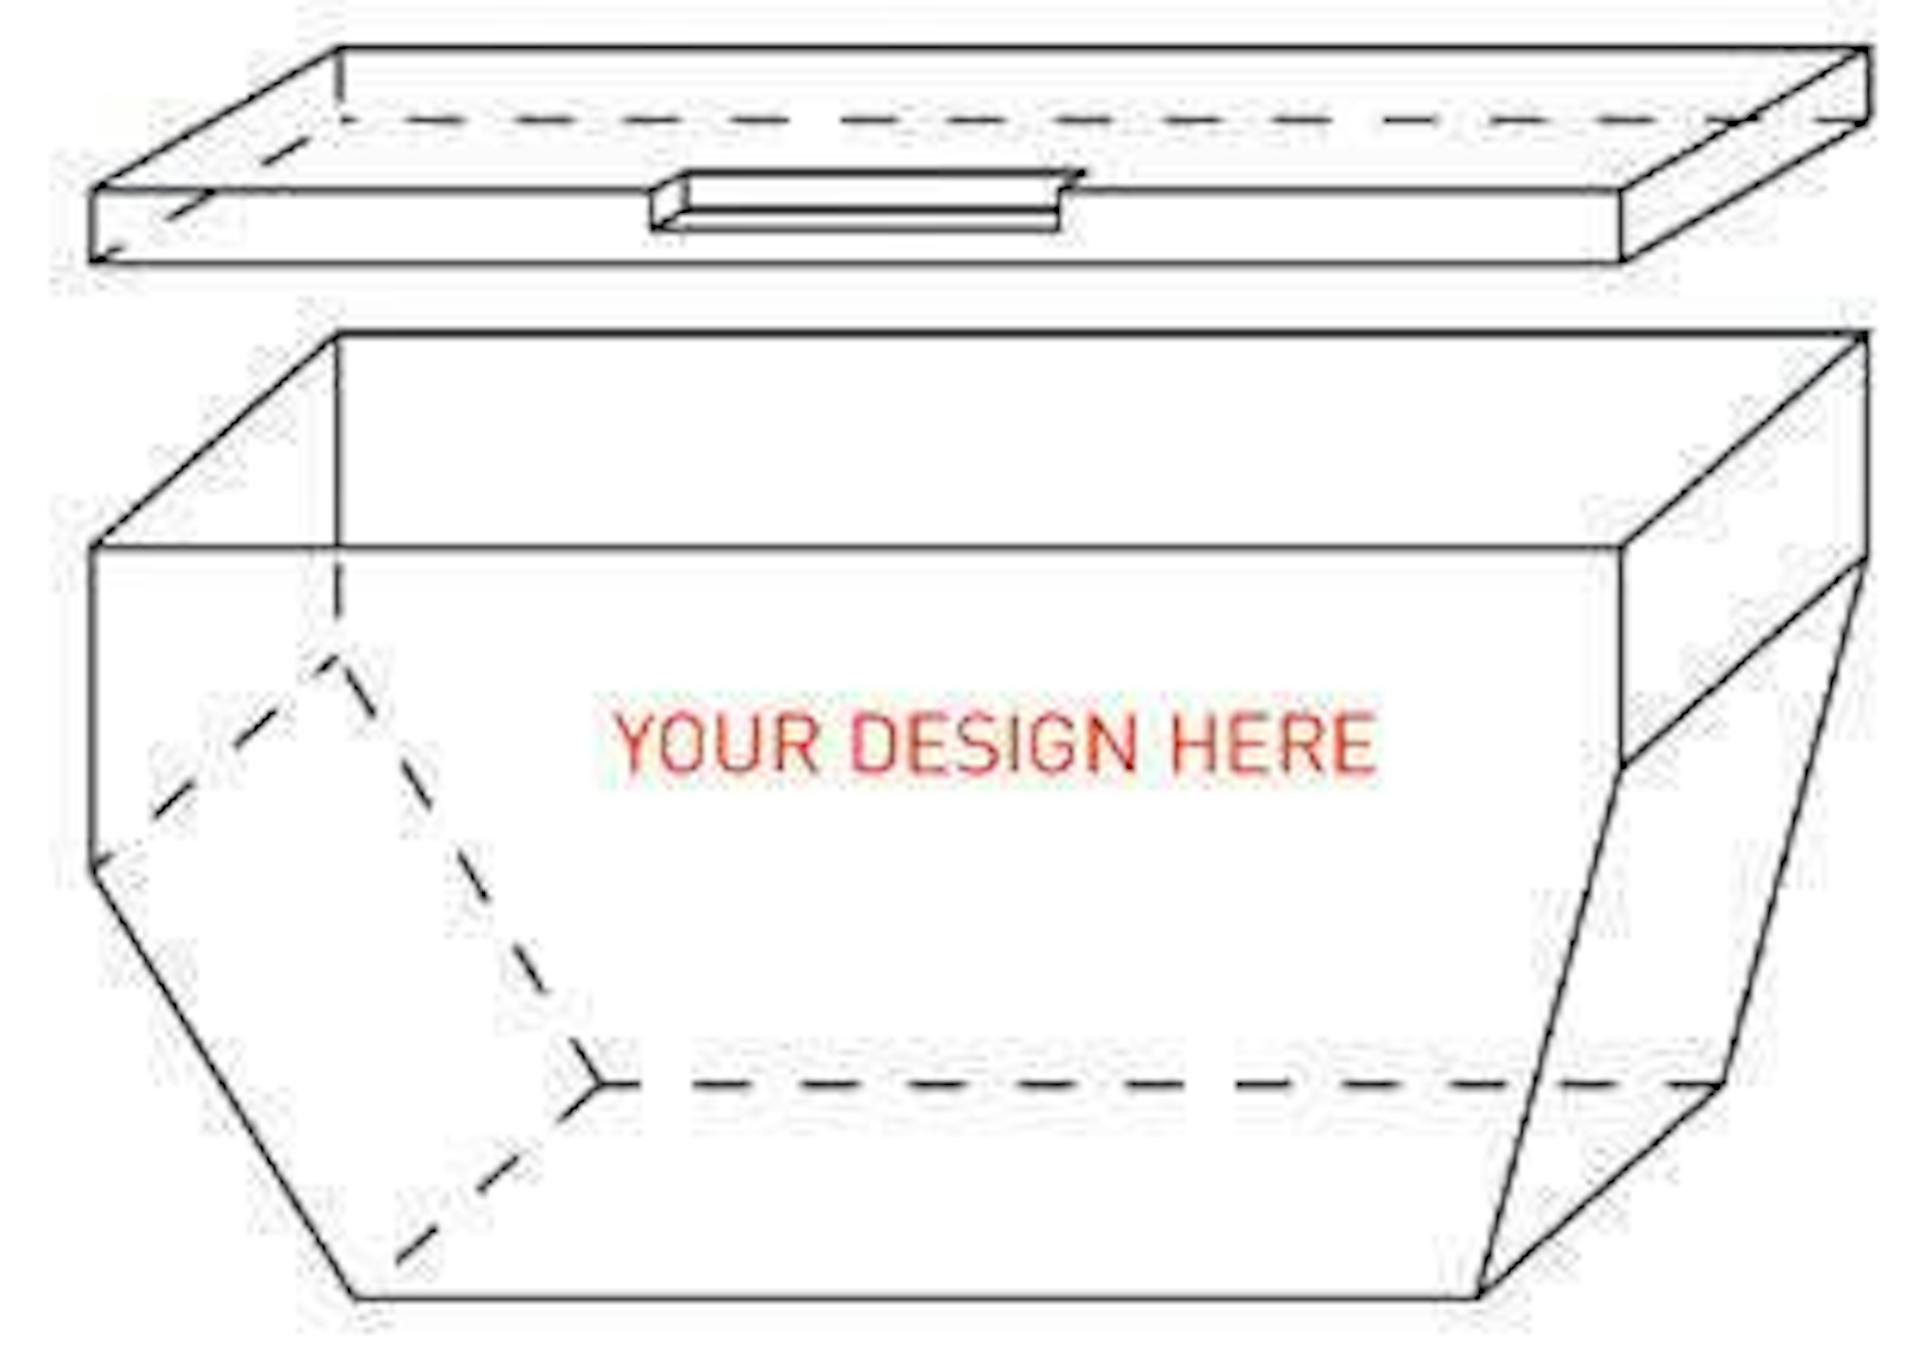 Your design here